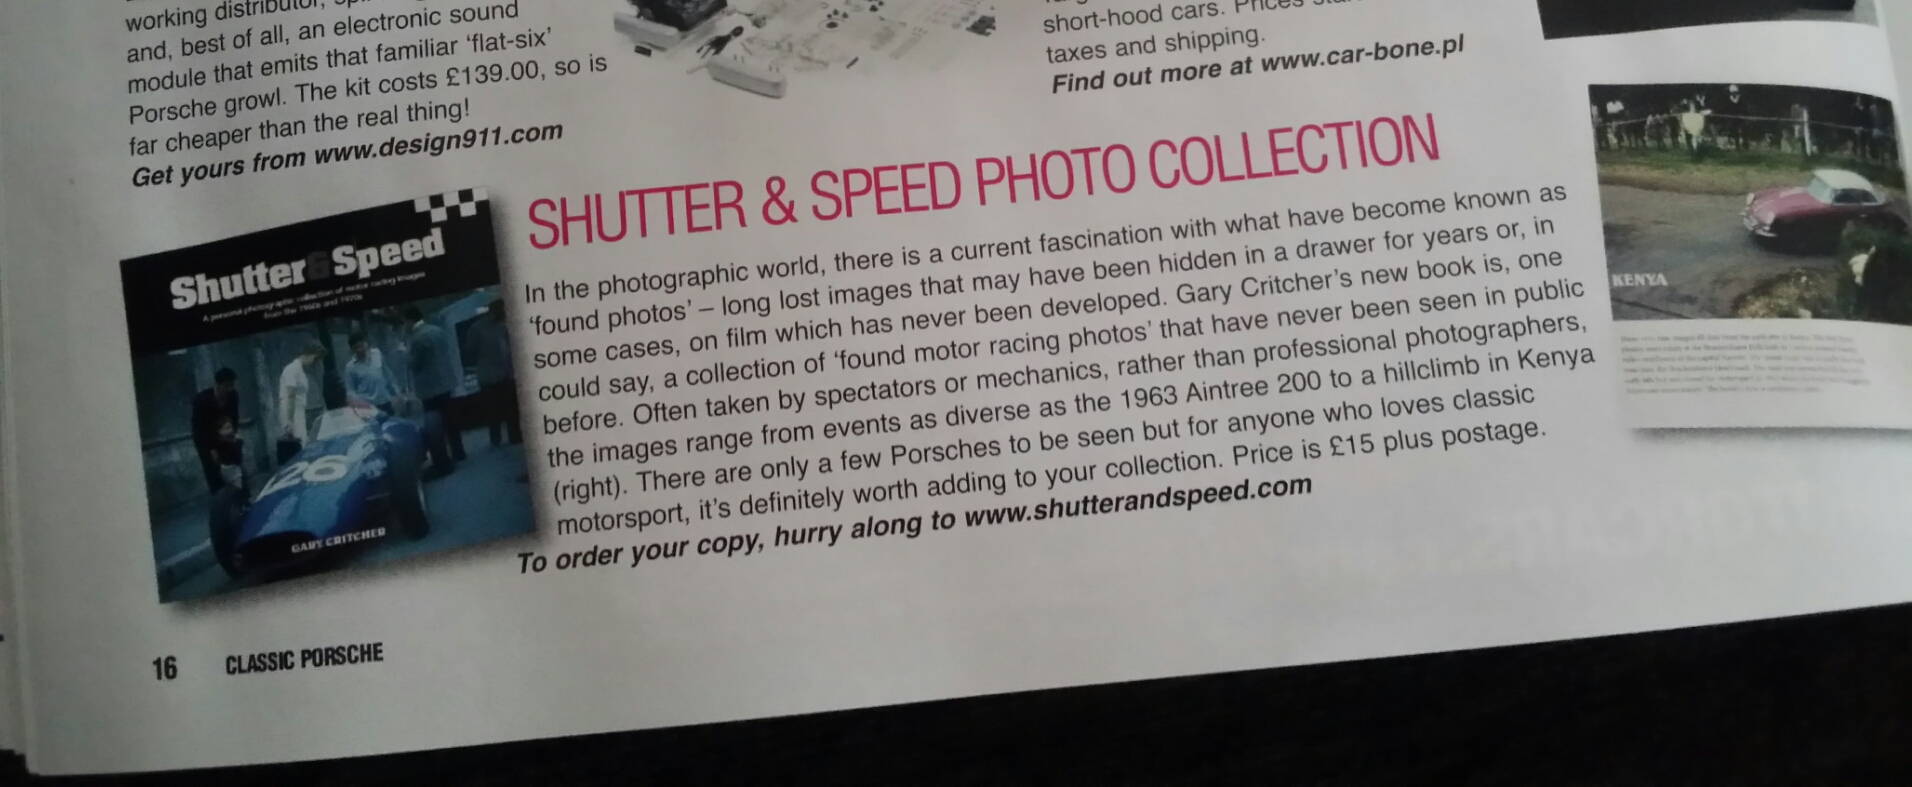 A review of the book 'Shutter & Speed Volume 1'.